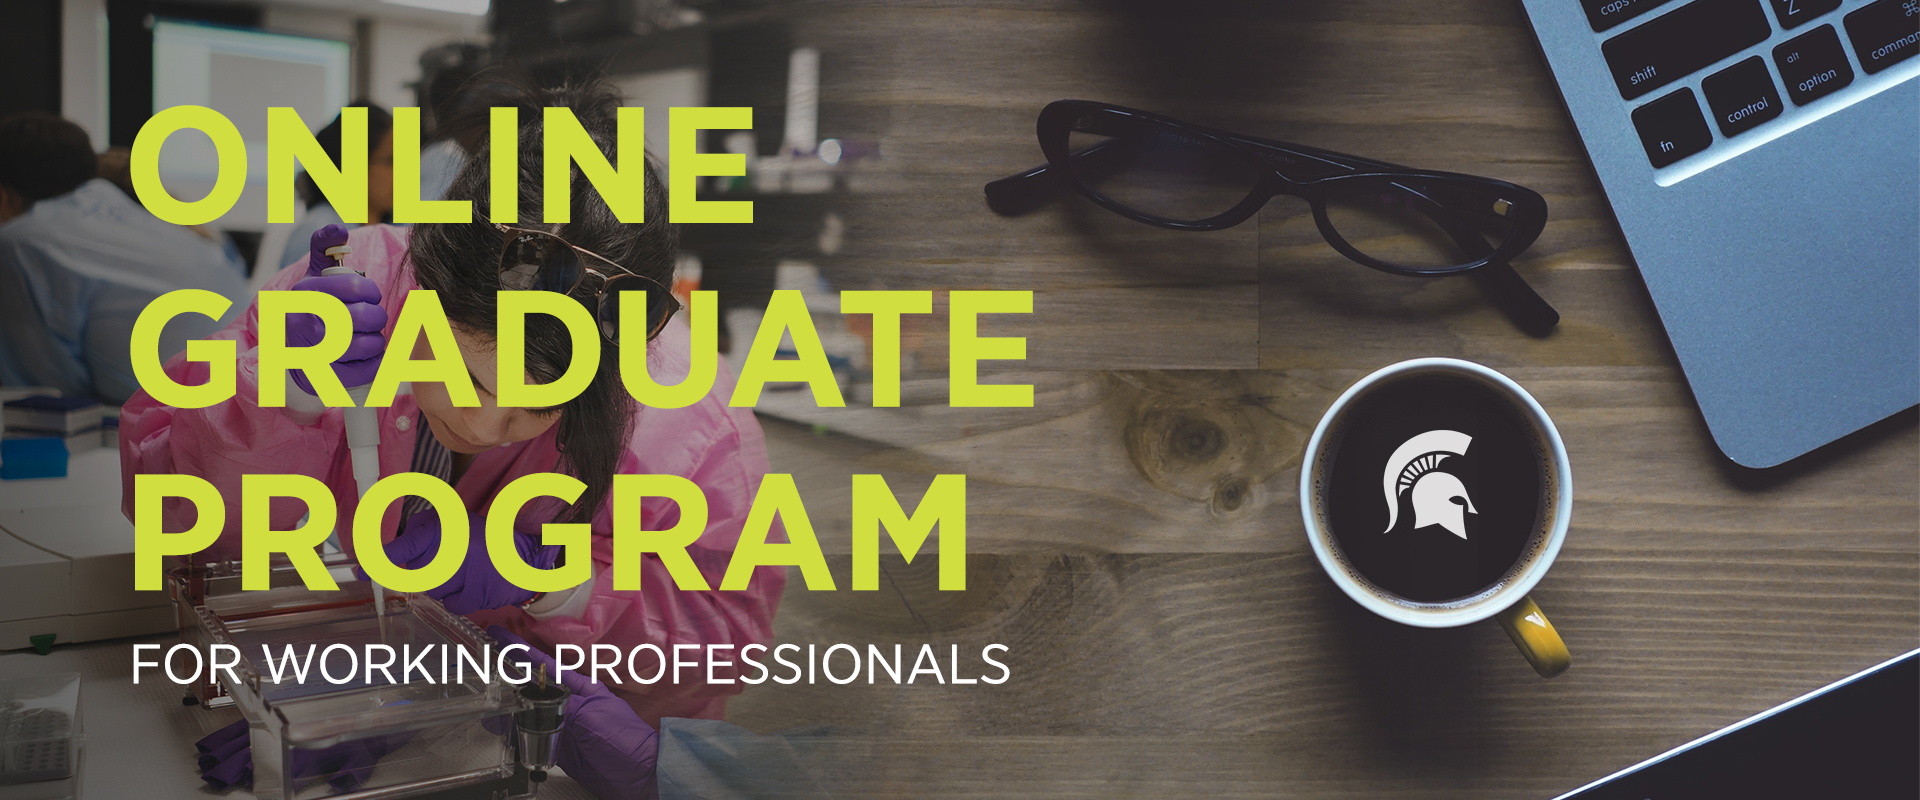 Banner image of laboratorian and desk with computer and coffee cup with the text online graduate program for working professionals on top of the image